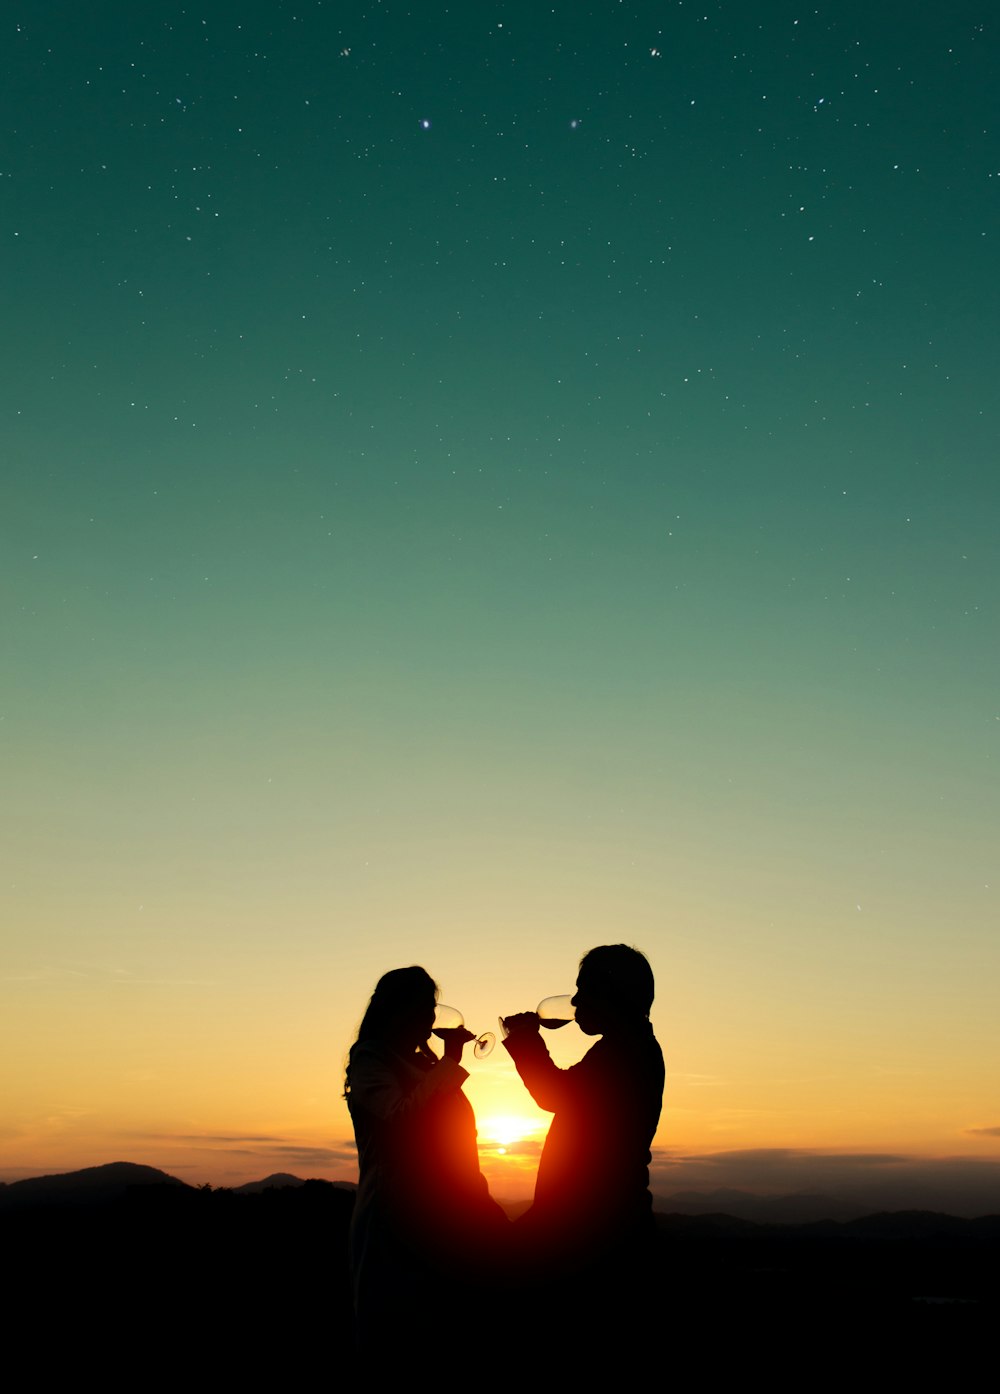 silhouette photo of man and woman holding wine glasses